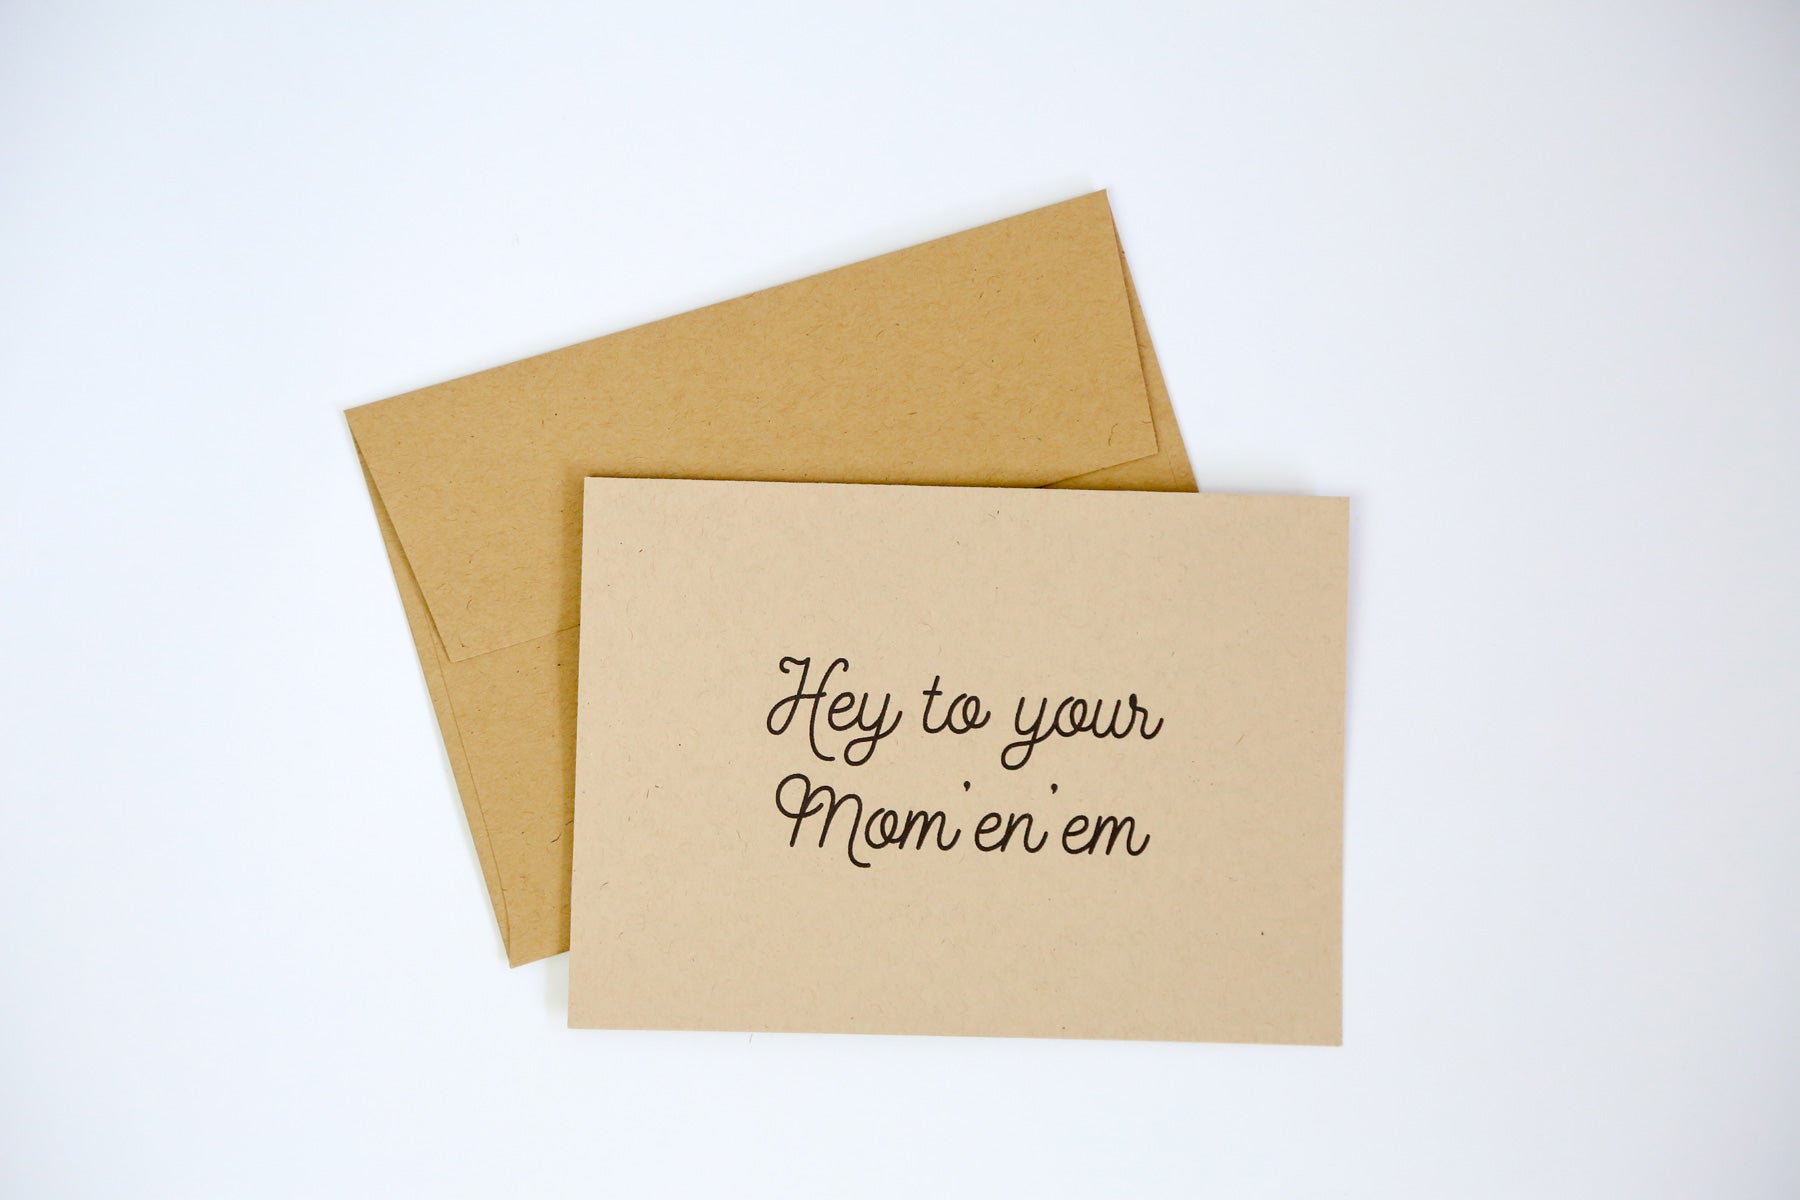 Hey to your mom-en-em - Greeting Card